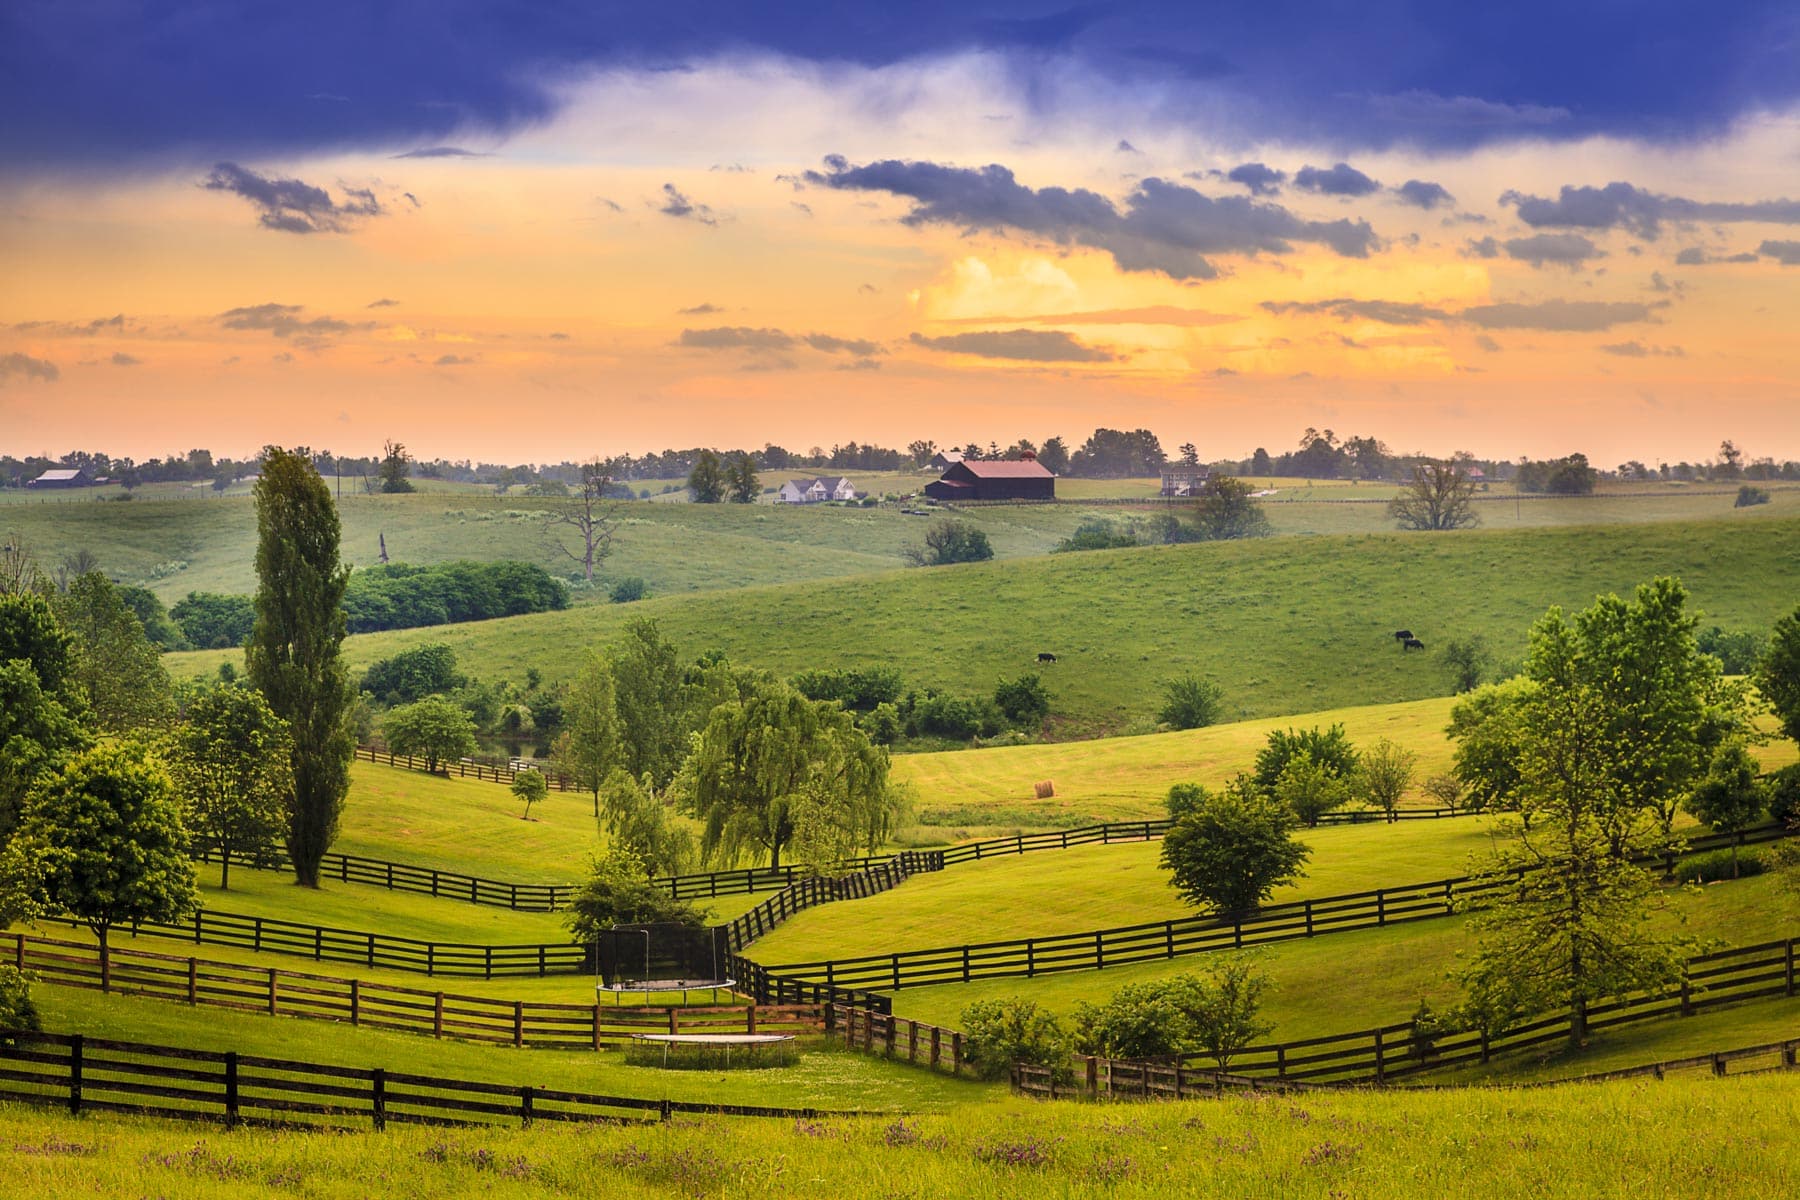 20 HONEST Pros & Cons of Living in Kentucky (Firsthand Account)